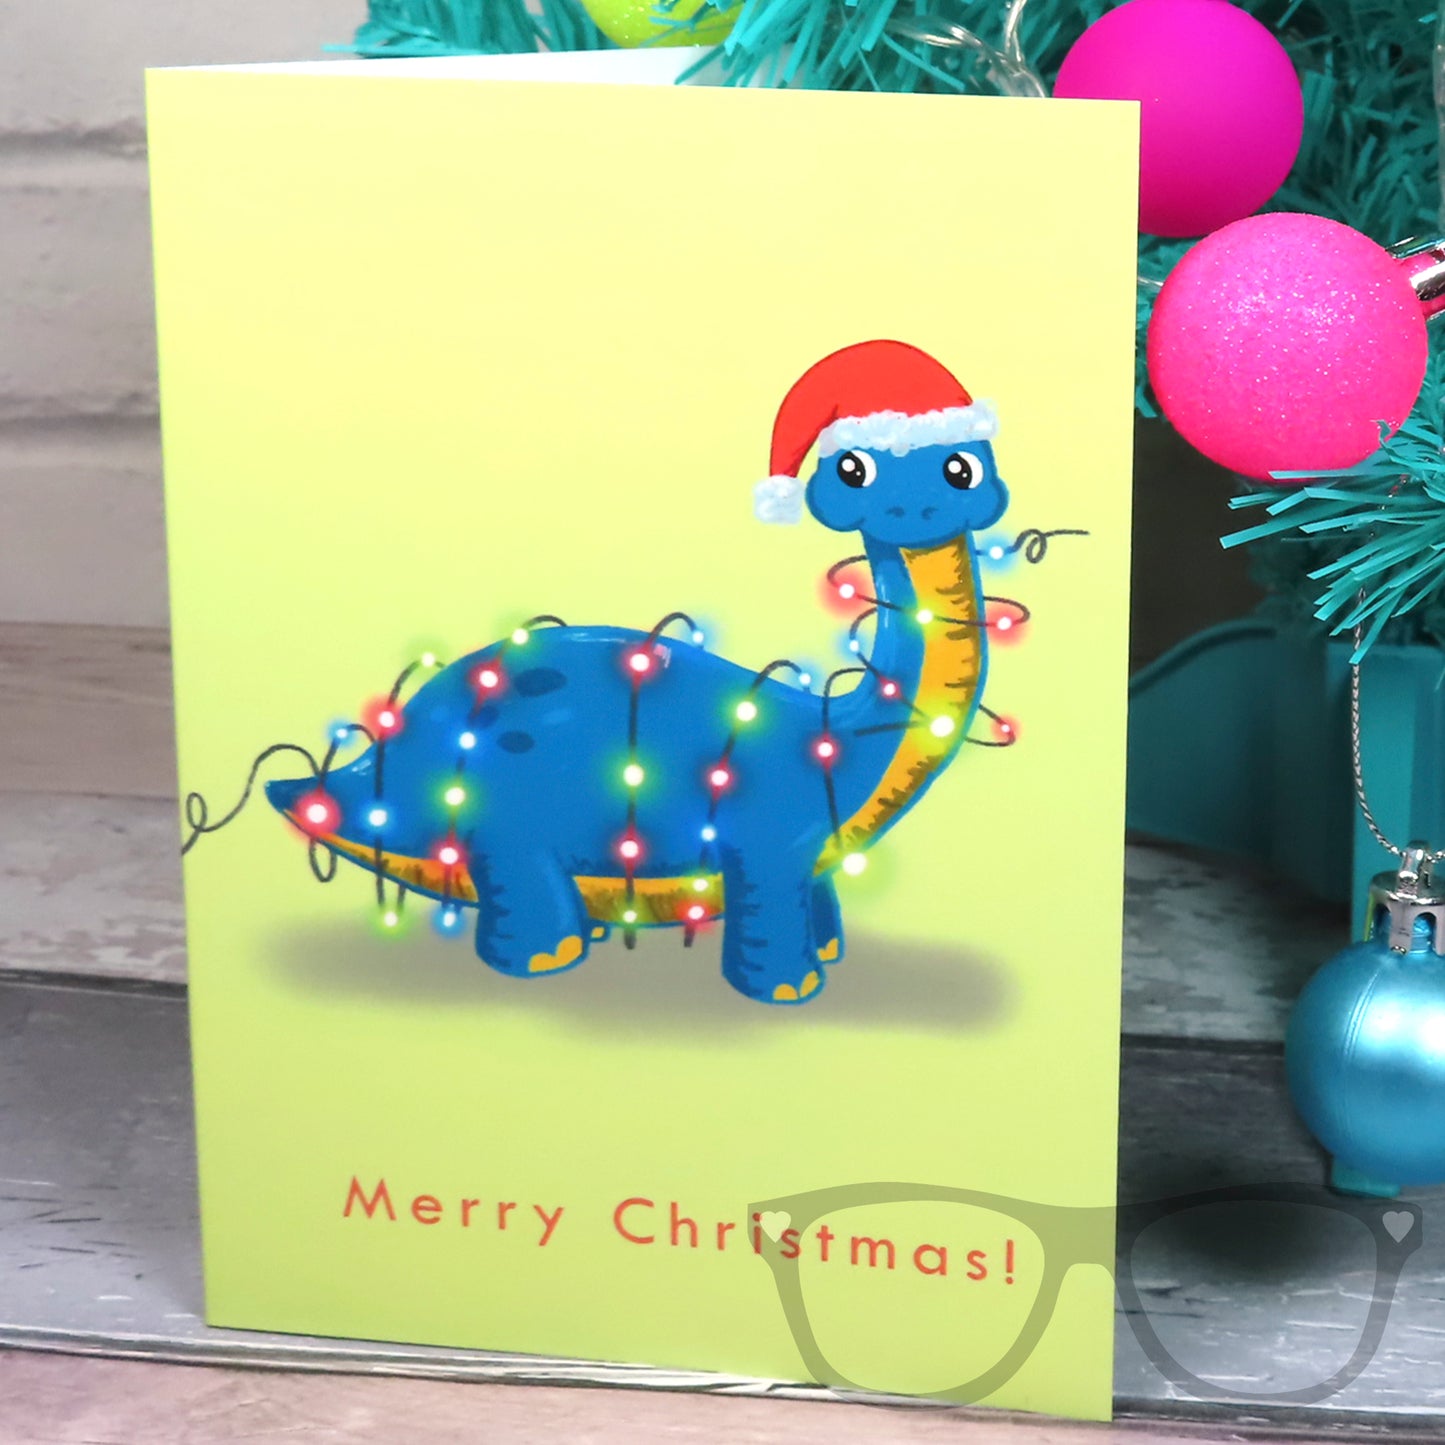 Christmas greetings card with Brenda the dinosaur on, card is standing against a festive tree